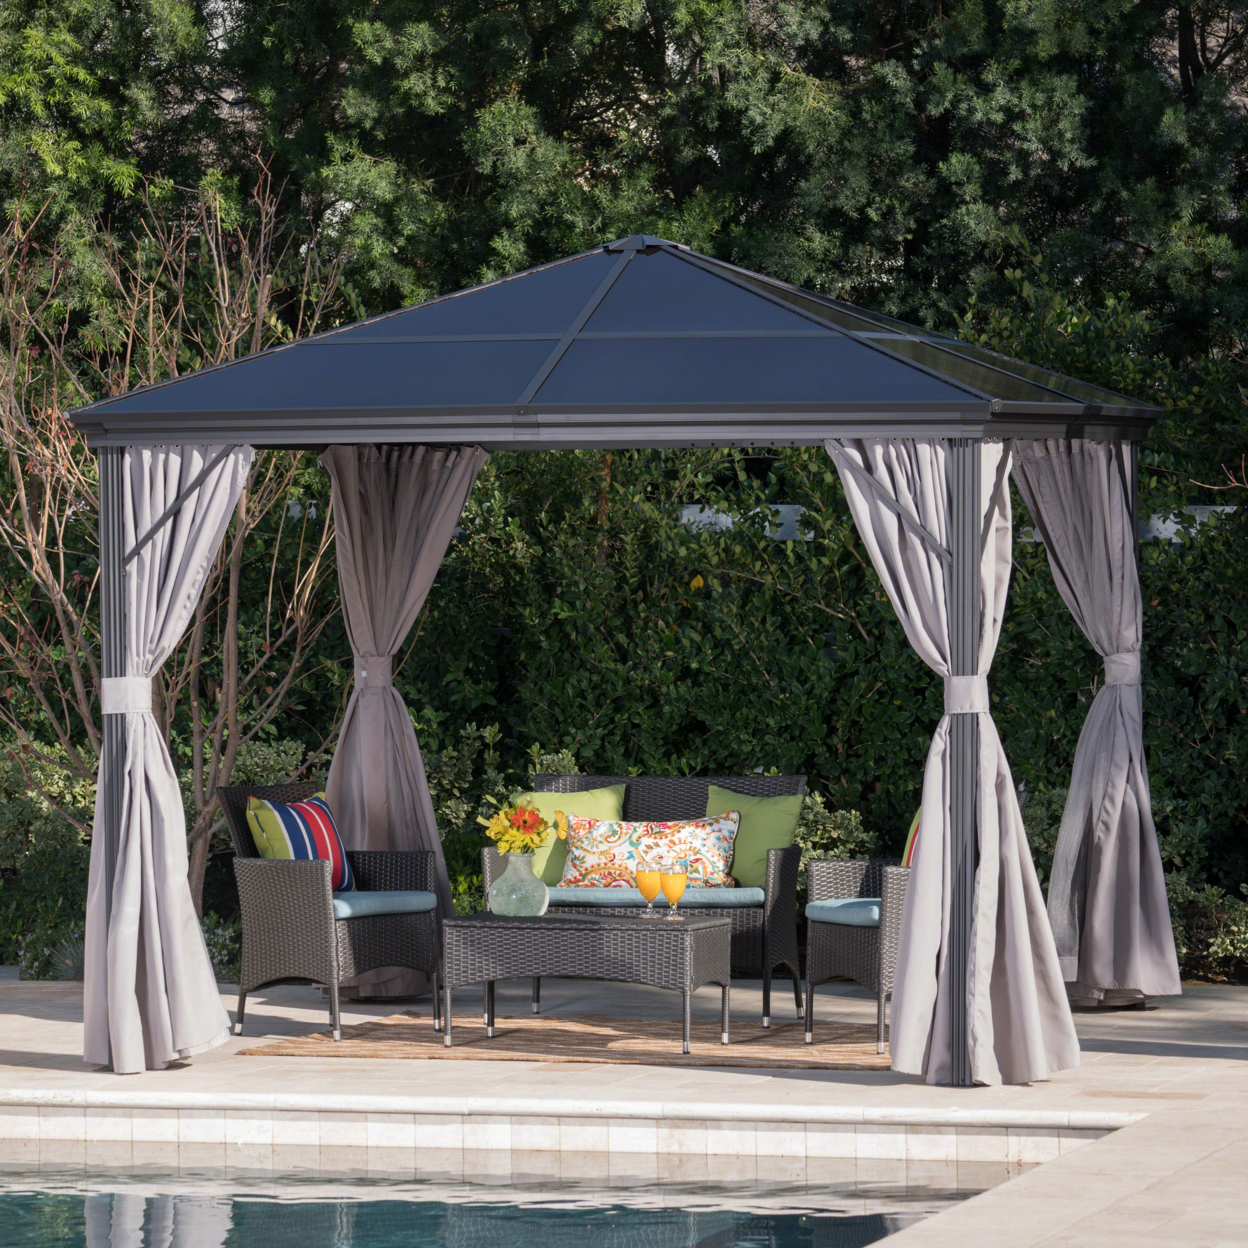 Bali Outdoor 10 X 10 Foot Rust Proof Aluminum Framed Hardtop Gazebo With Curtains - Gray/Black